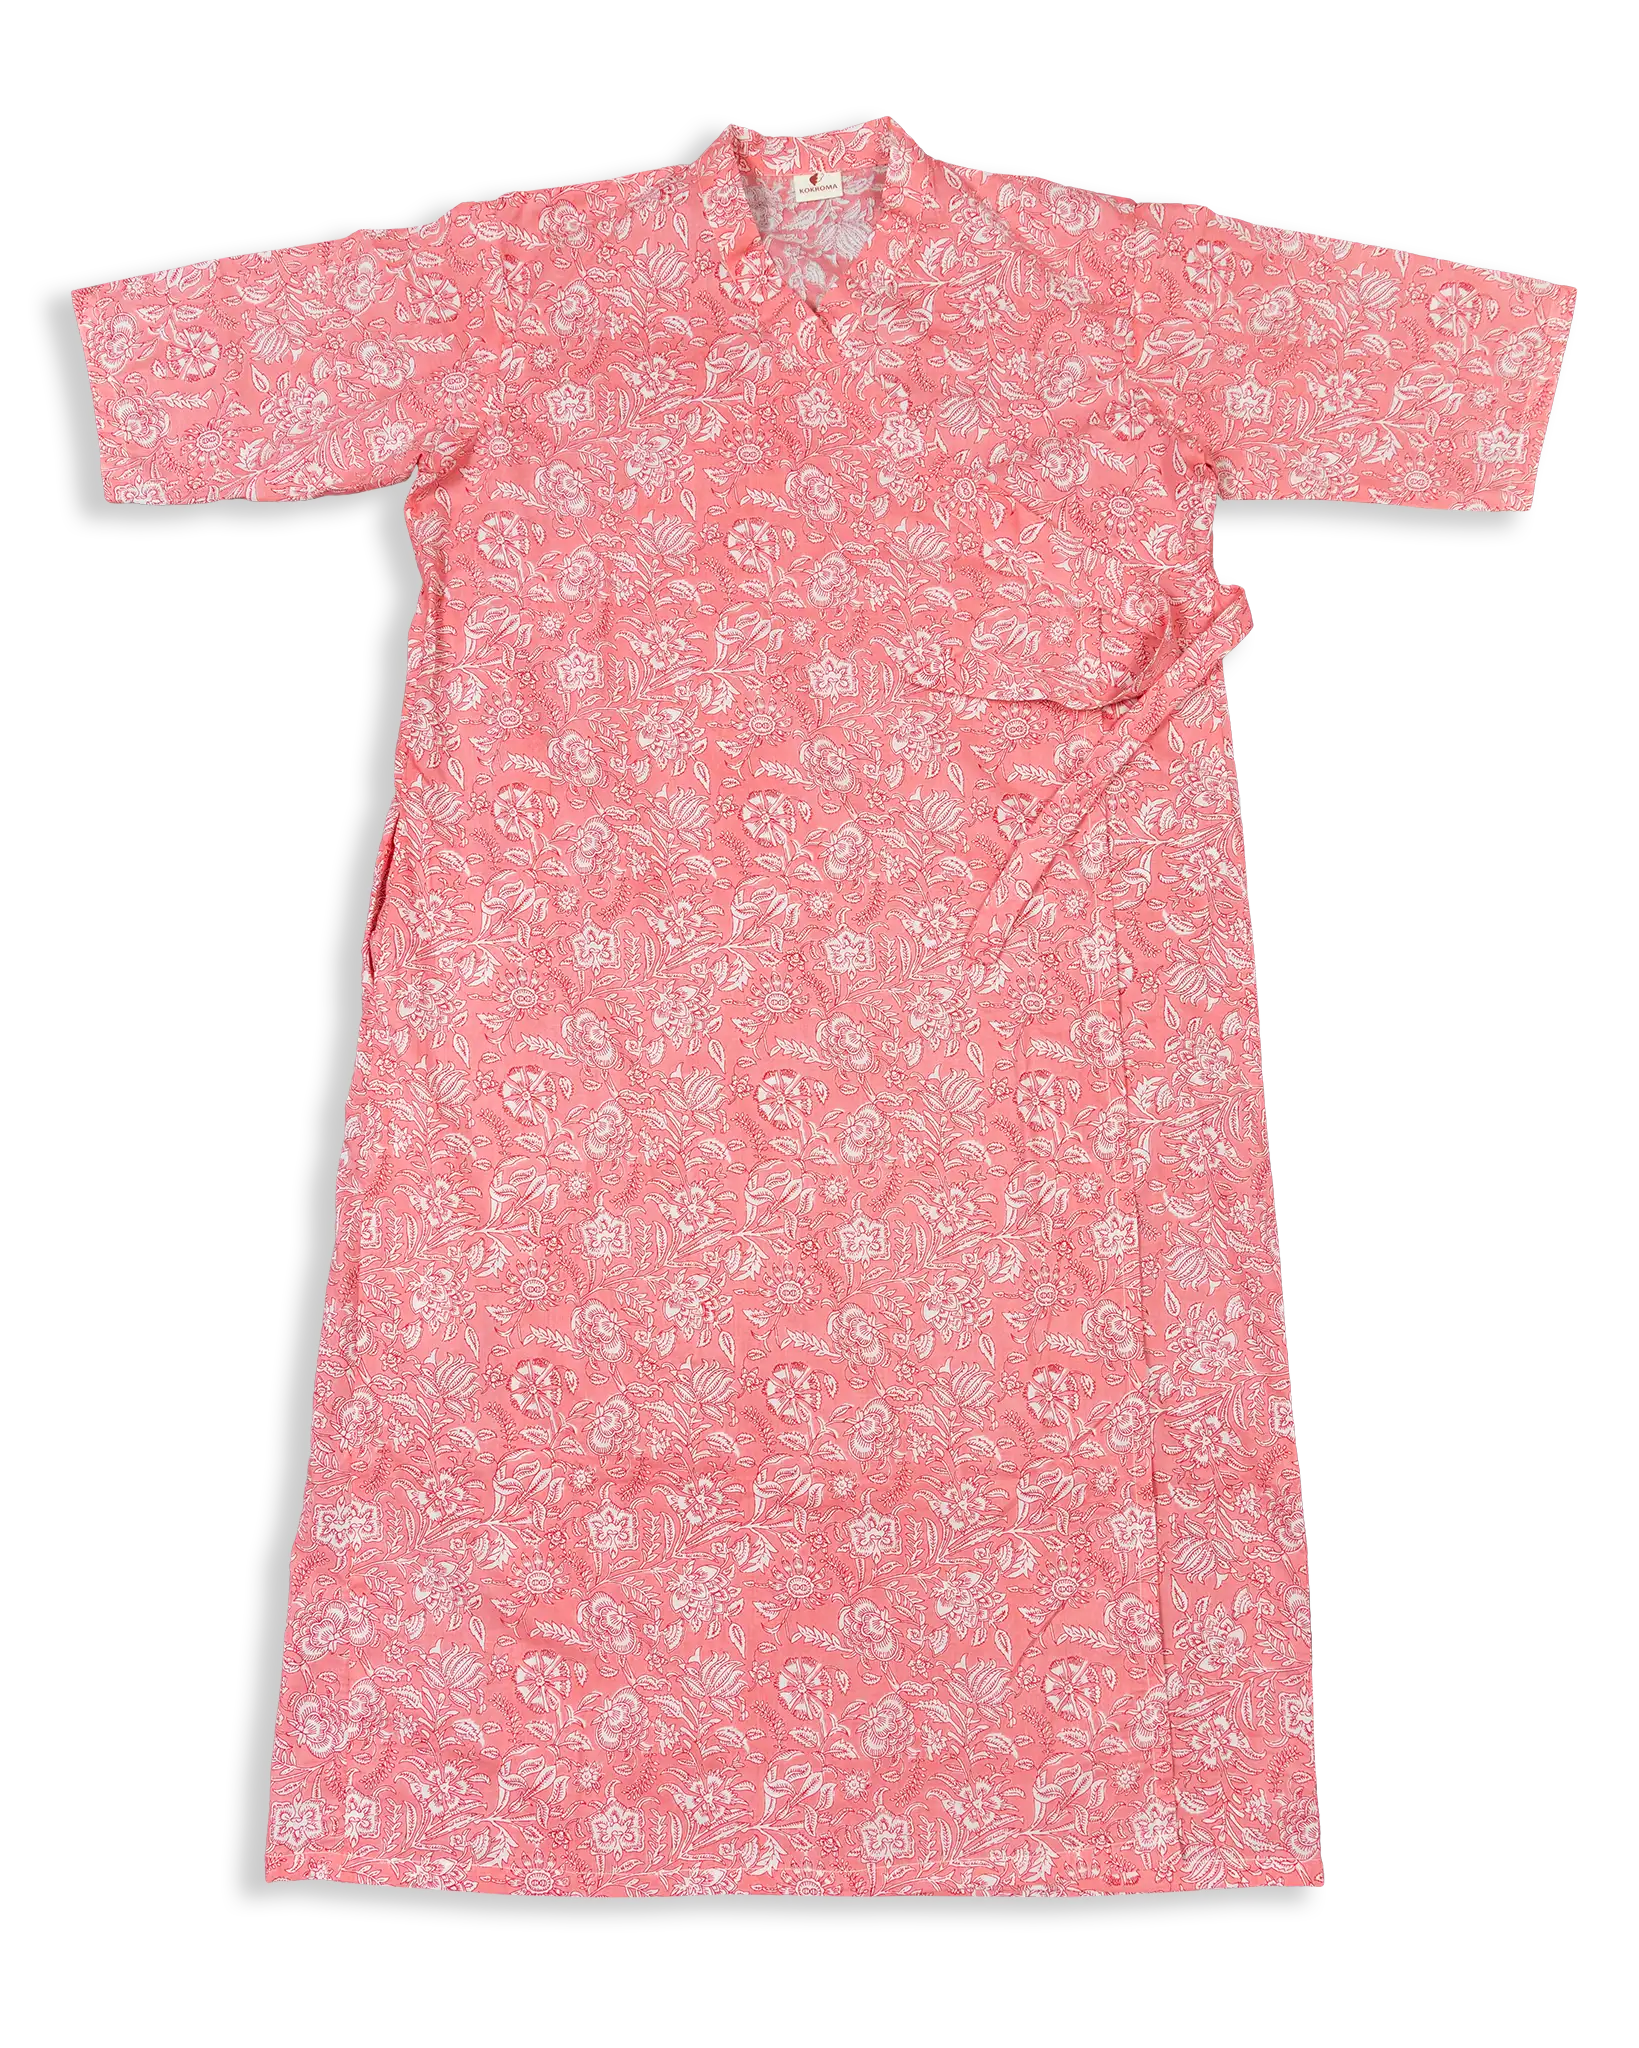 The Mother Gown made with 100% cotton with a print is a beautiful and comfortable addition to any mother's wardrobe. With its elegant design, soft cotton material, and easy-care fabric, this gown is the perfect choice for expecting or new mothers.